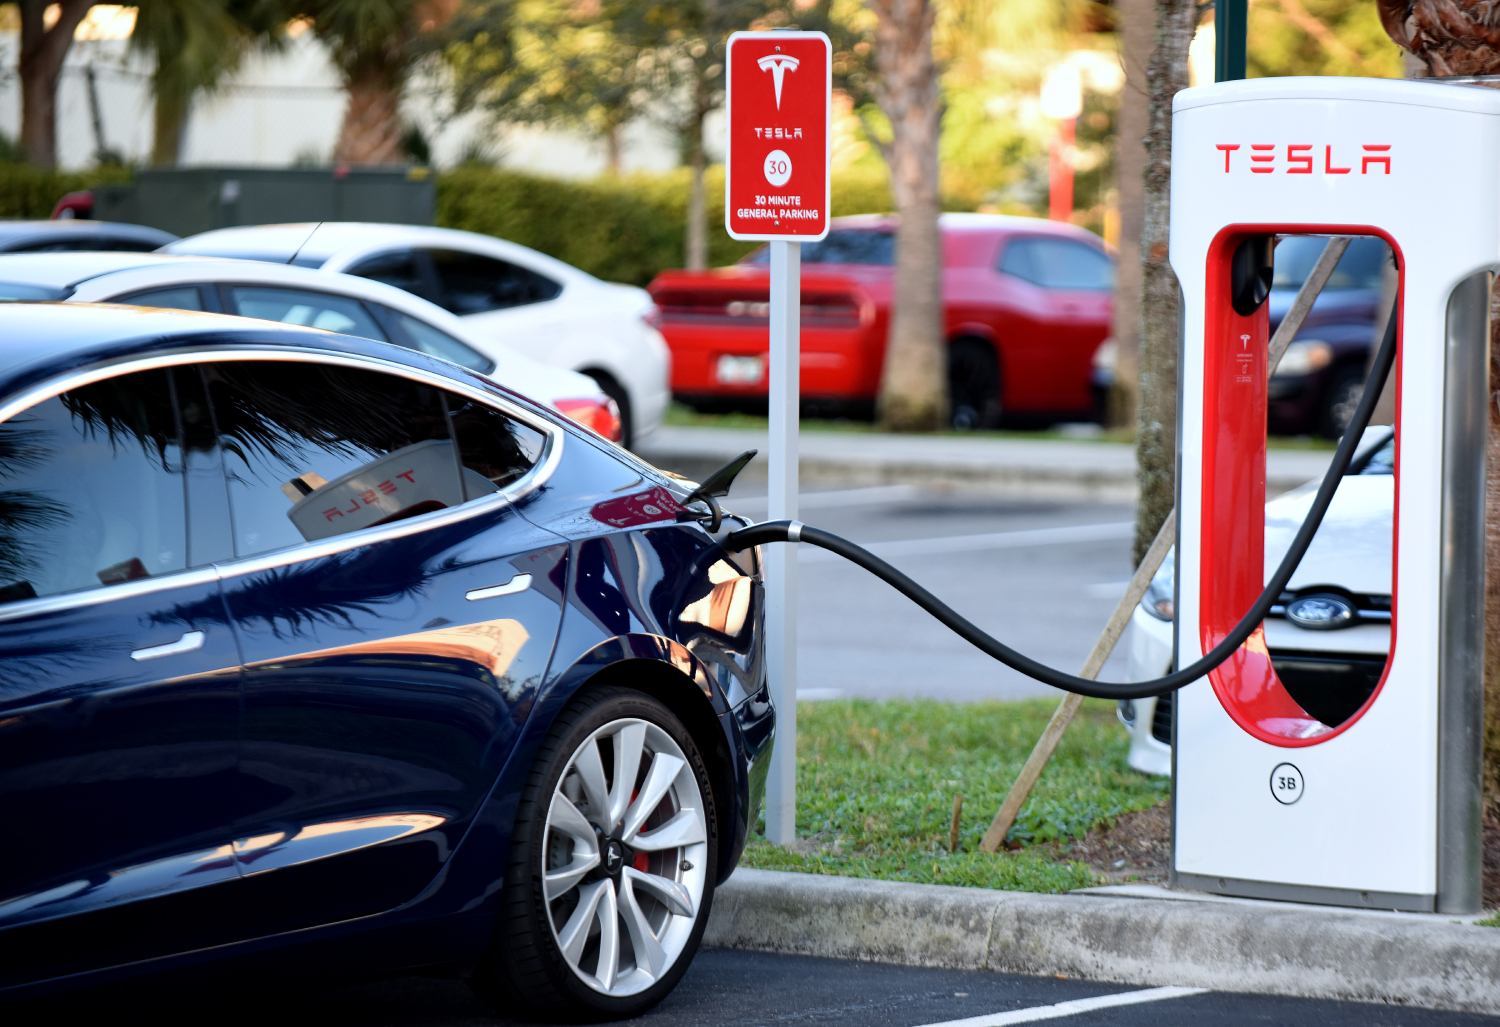 How to Use a Tesla Charging Station